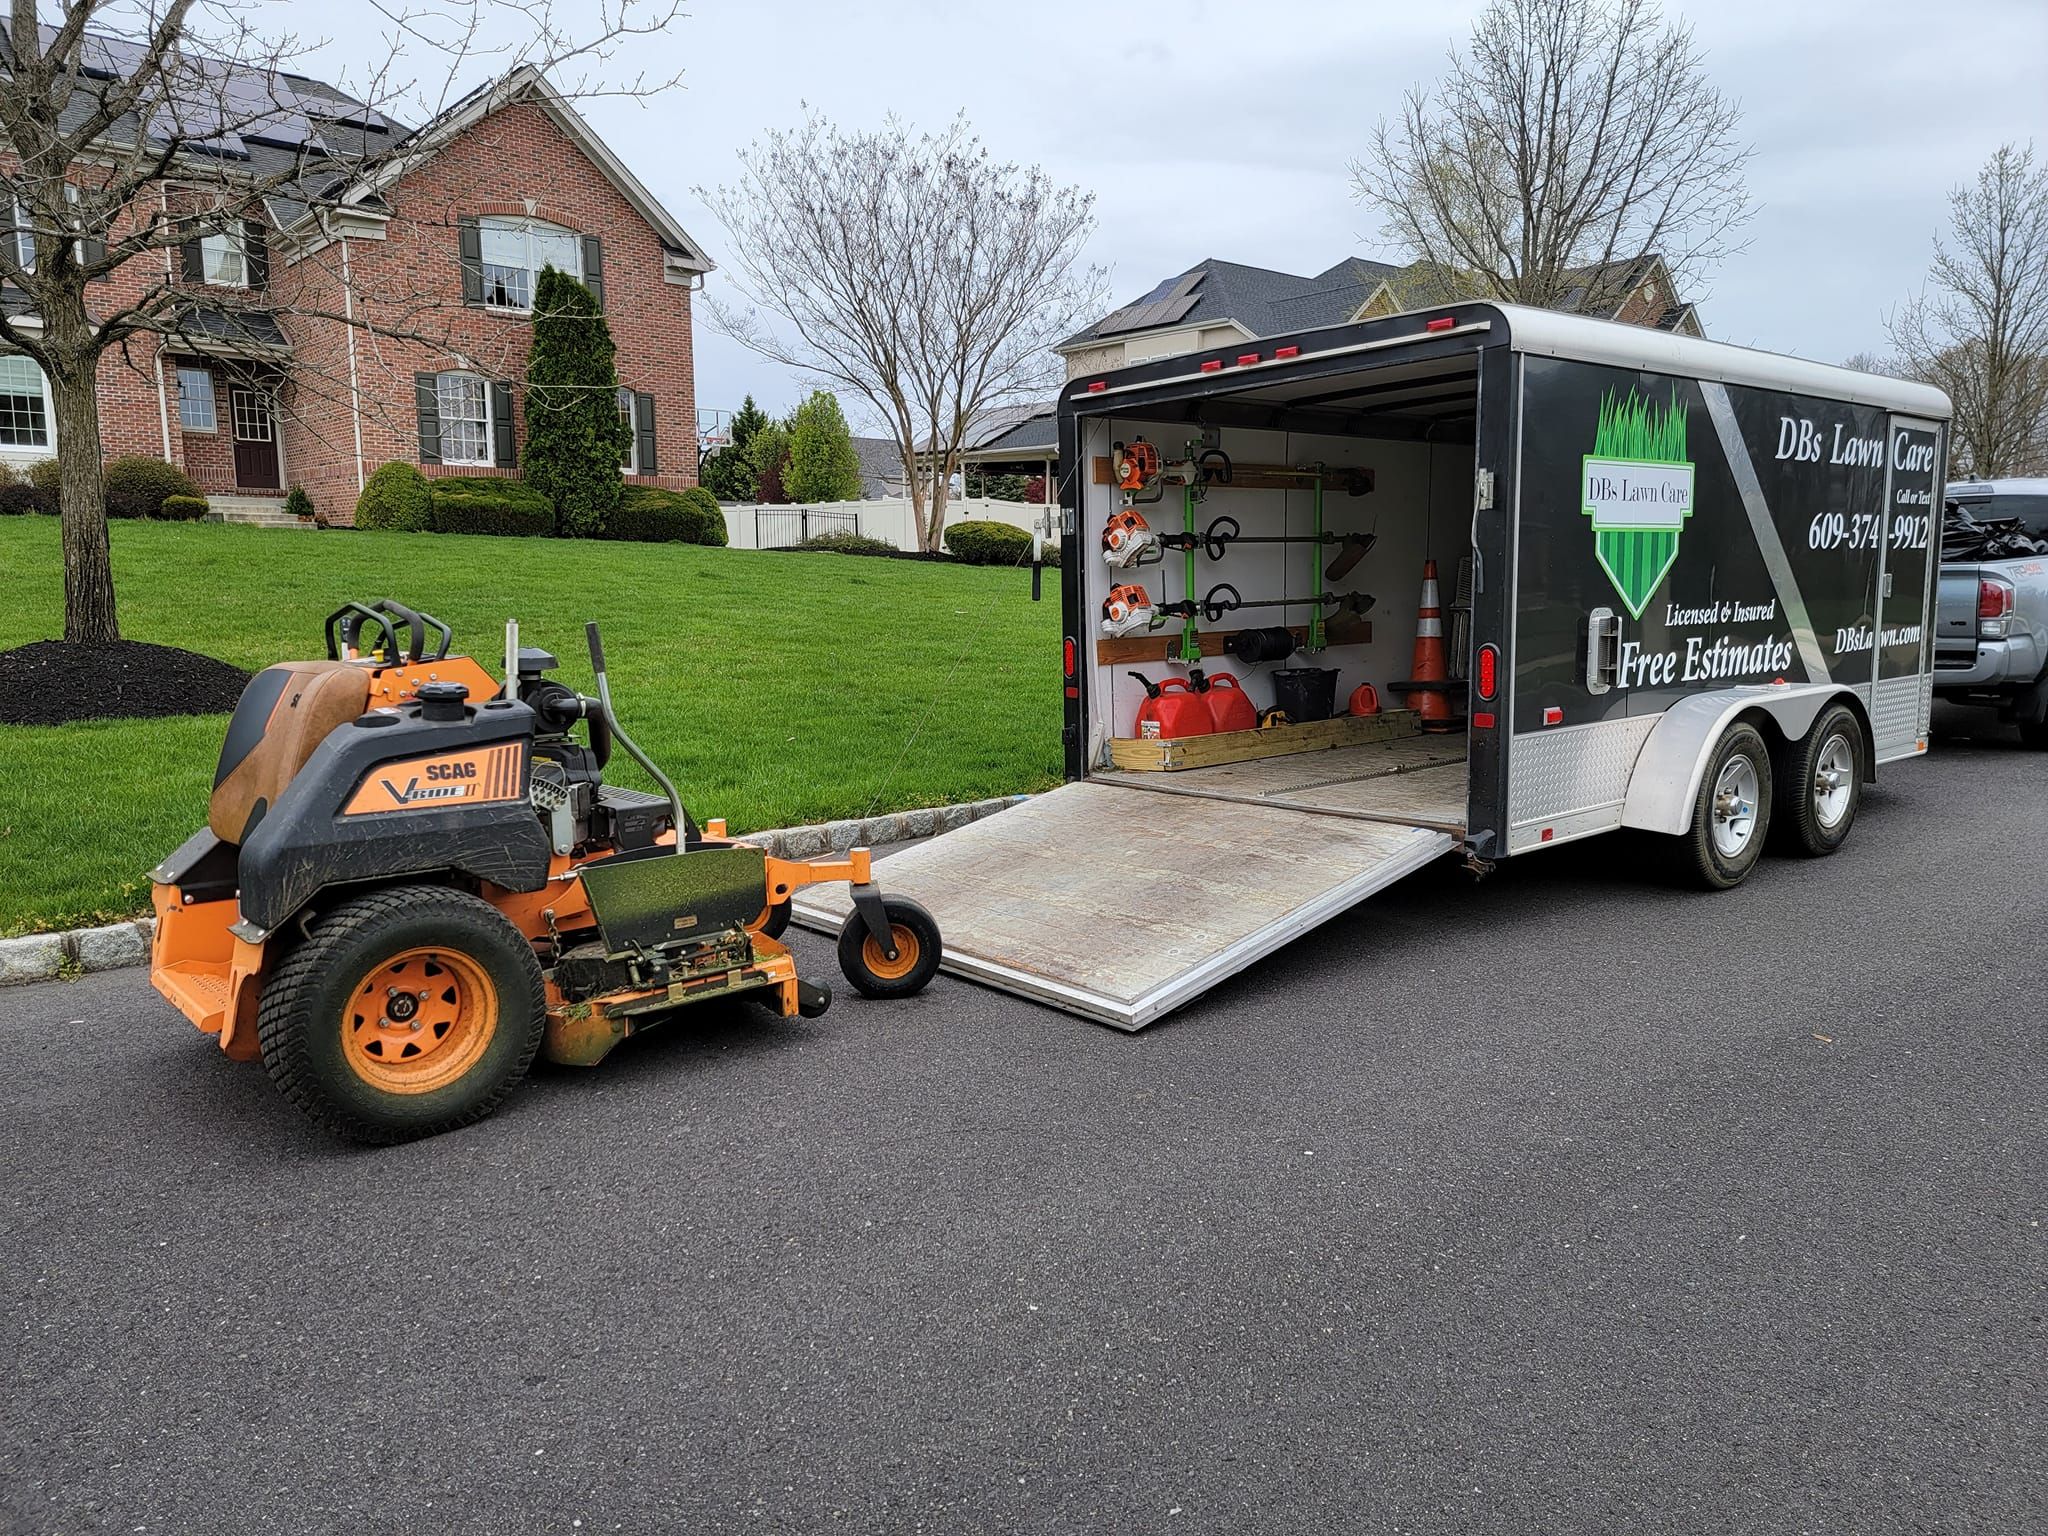 Full Service for DBs Lawn Care in Westampton Township, New Jersey